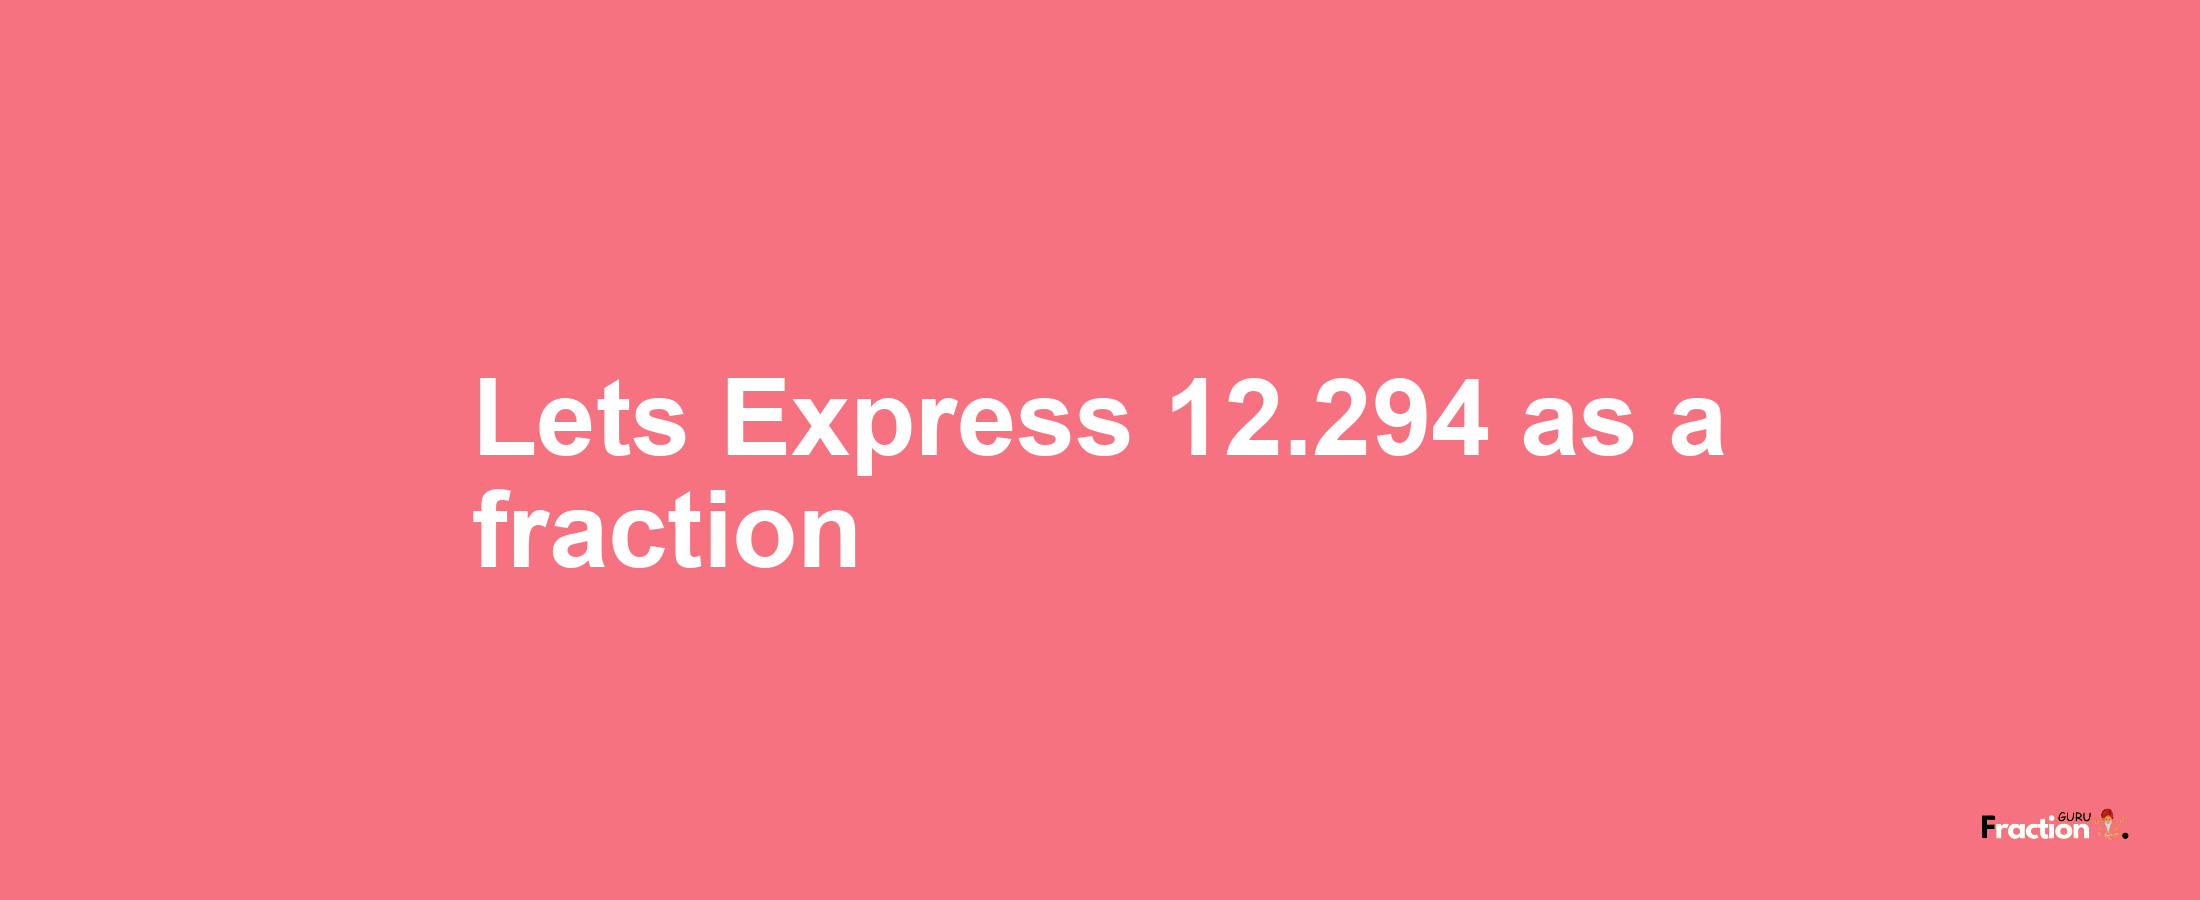 Lets Express 12.294 as afraction